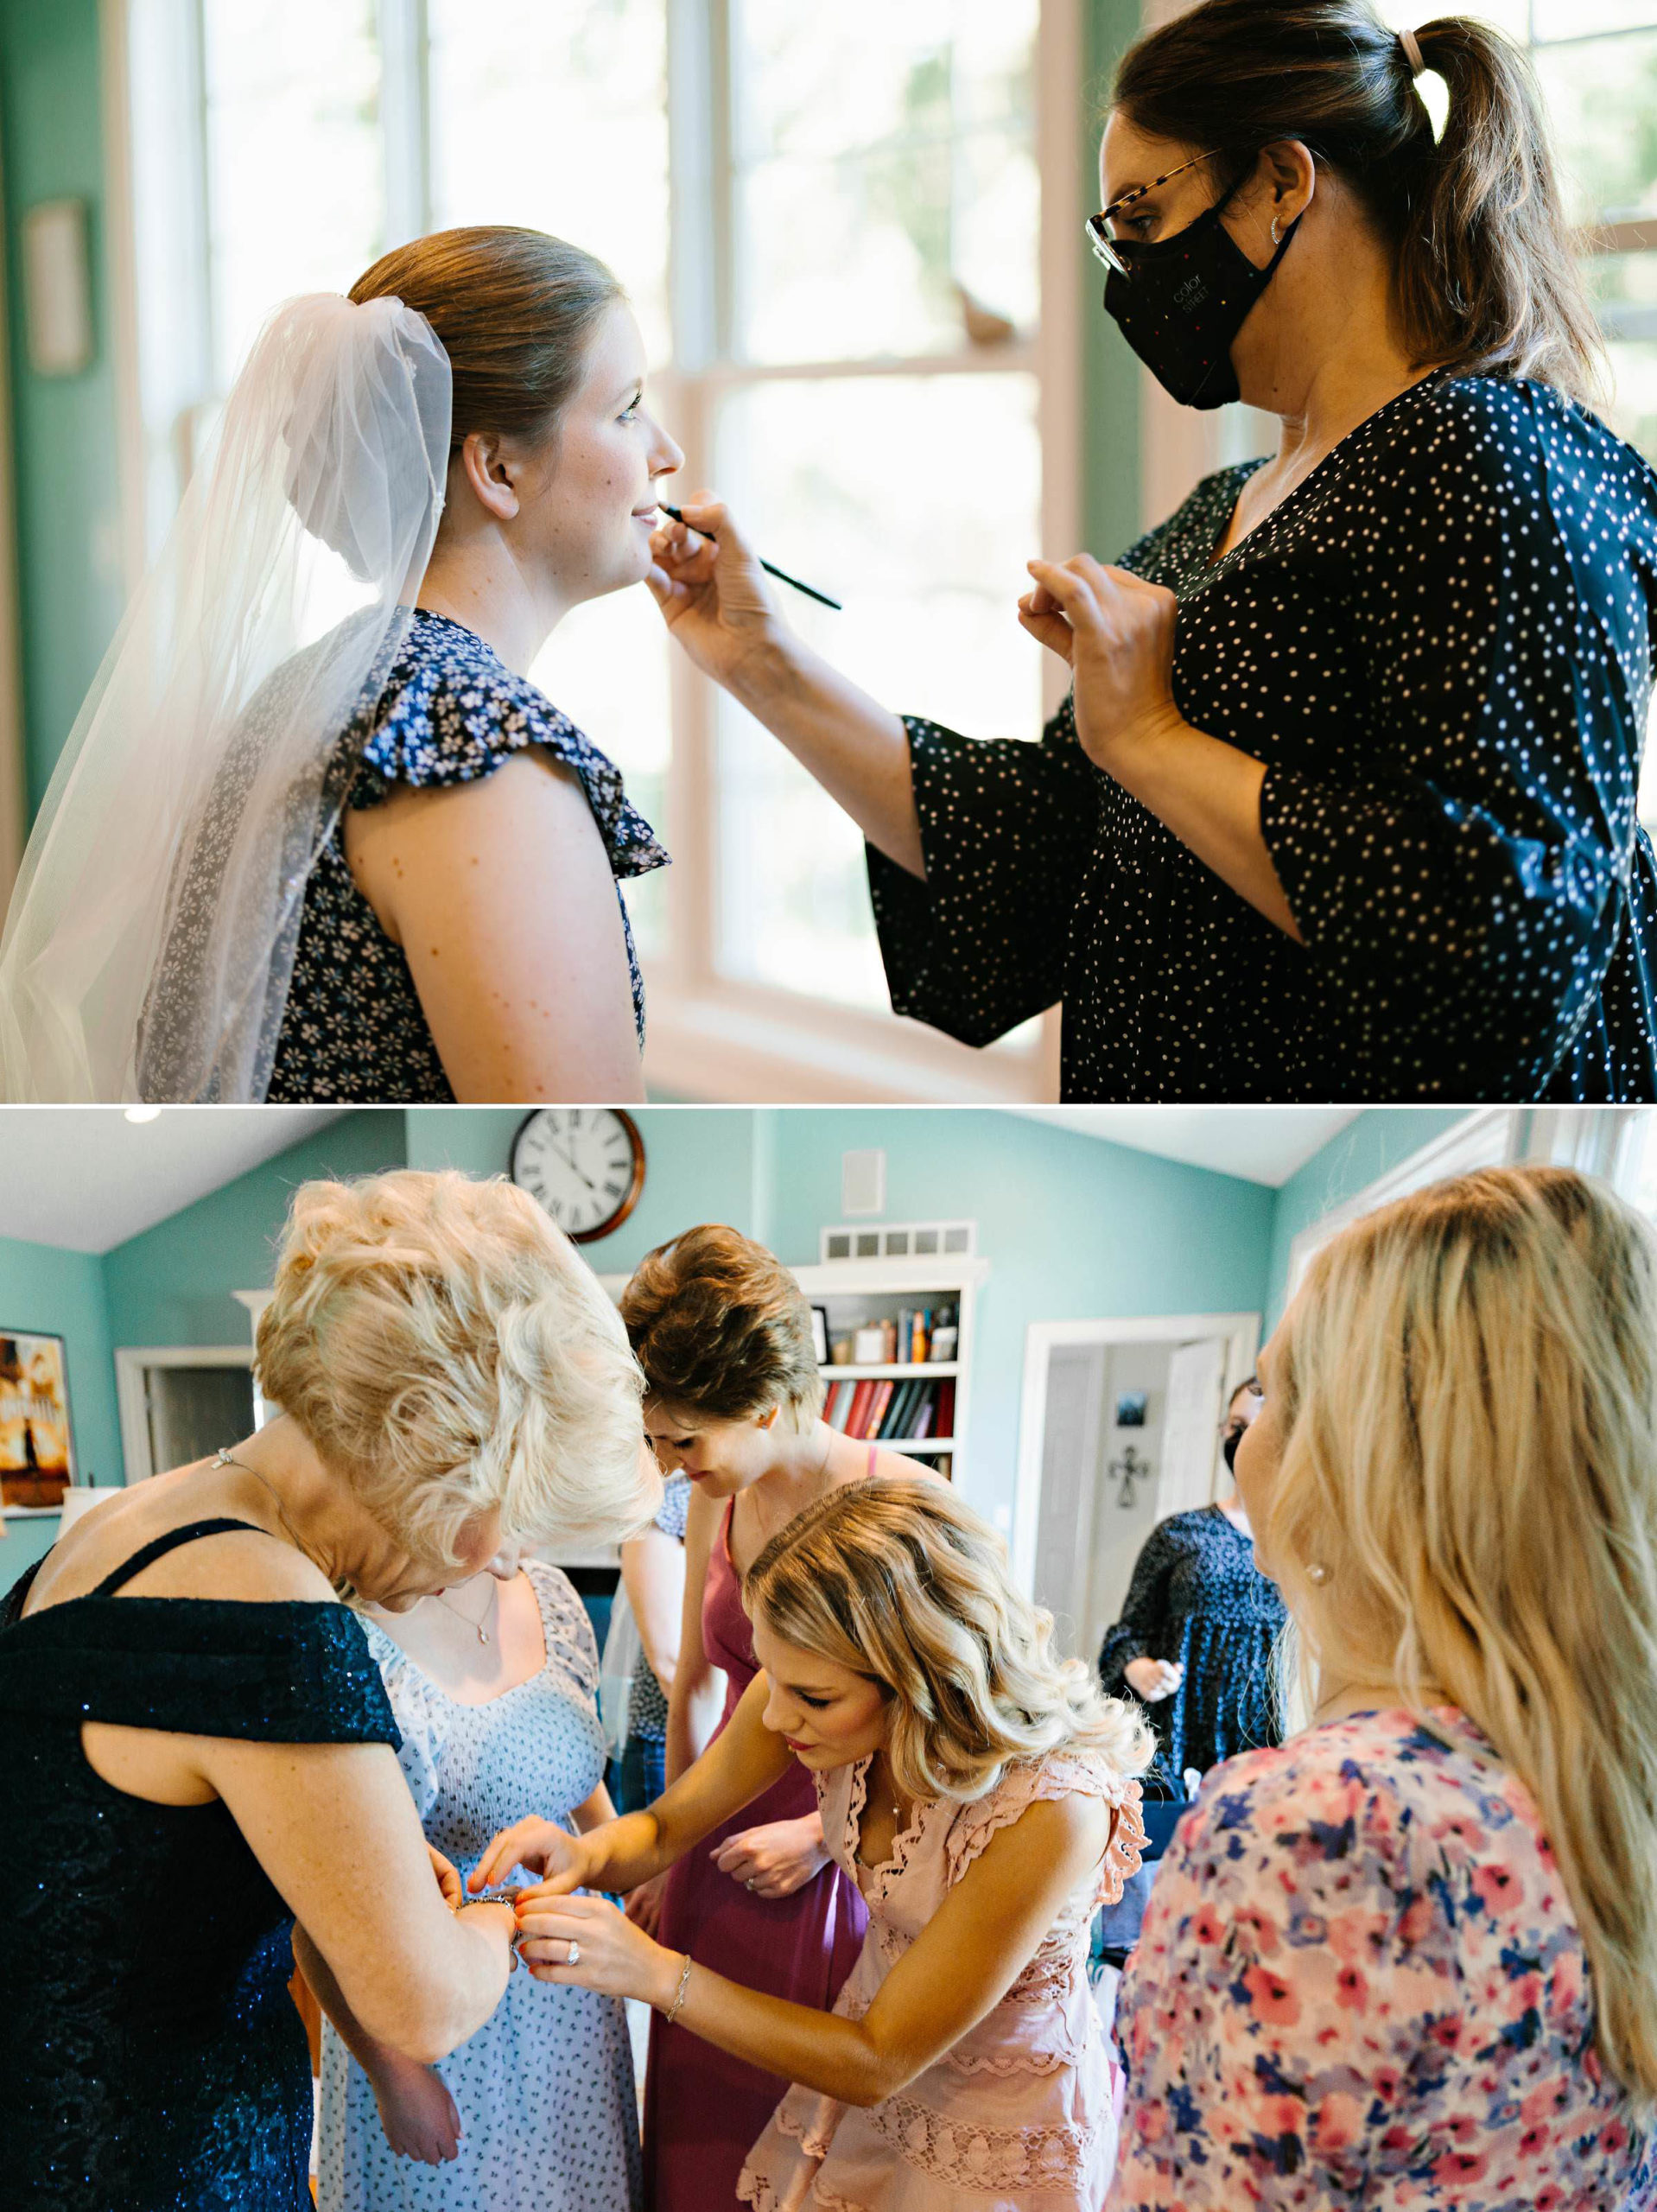 Makeup artist is doing bride's lip liner and bride is wearing veil; bride's family and friends are getting ready in a room and adjusting jewelry by Detroit Wedding Photographer Michele Maloney